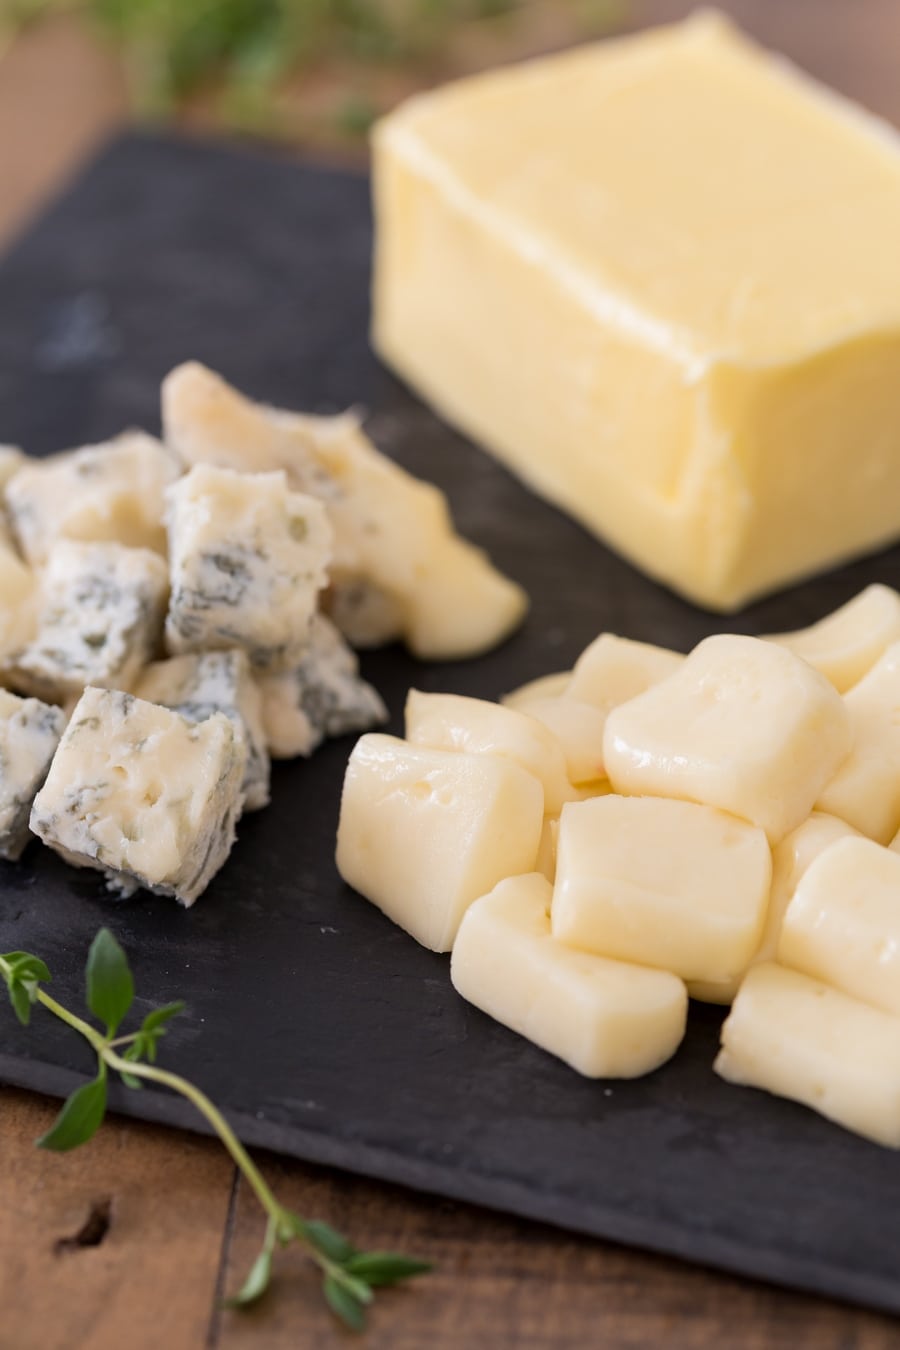 Cubes of taleggio and gorgonzola on a tray, butter in the background.